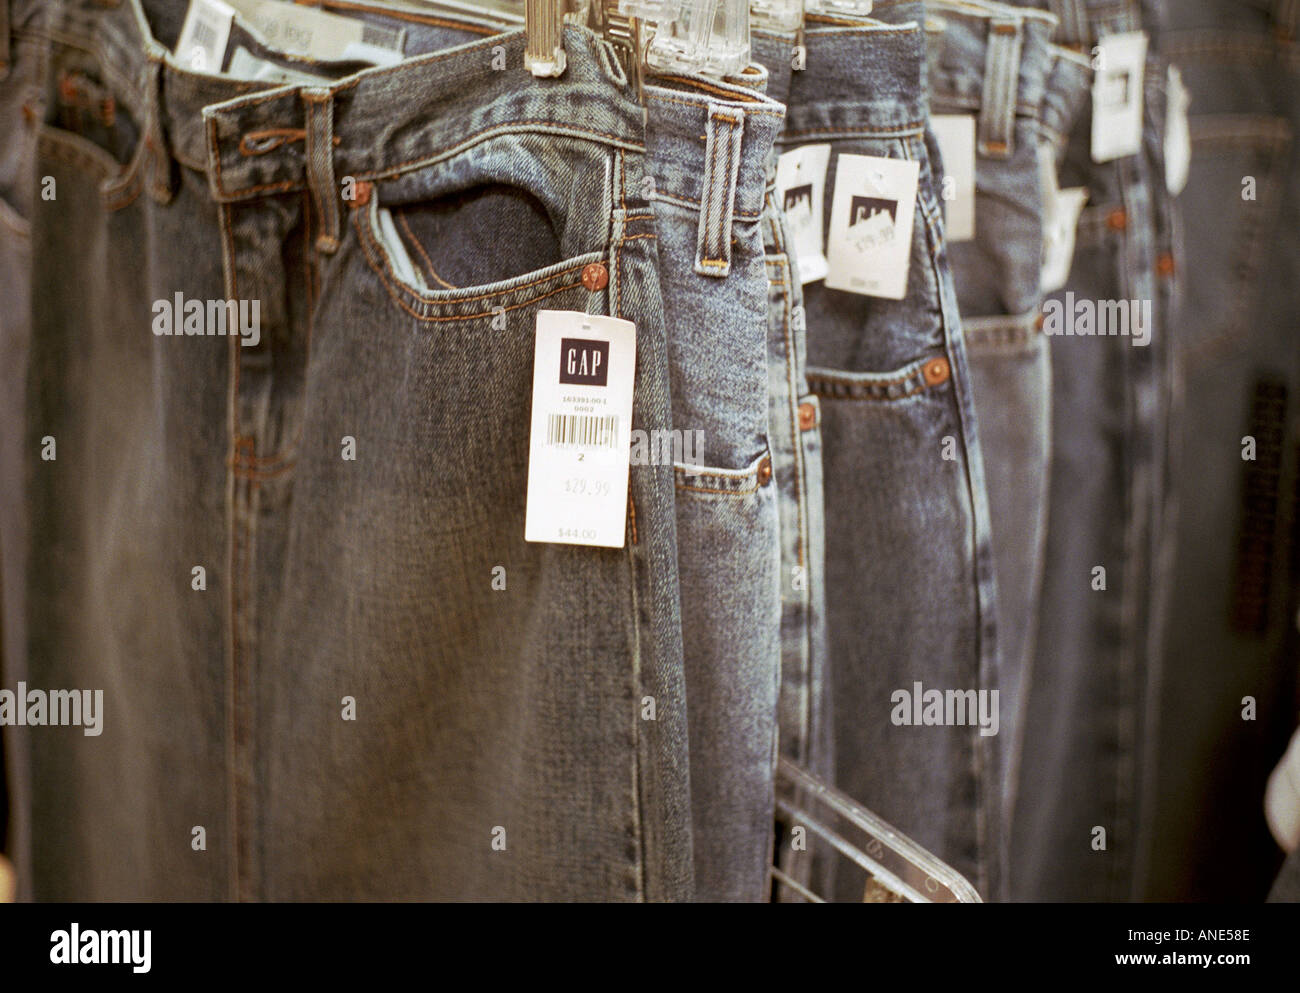 Jeans on sale at The Gap Stock Photo - Alamy